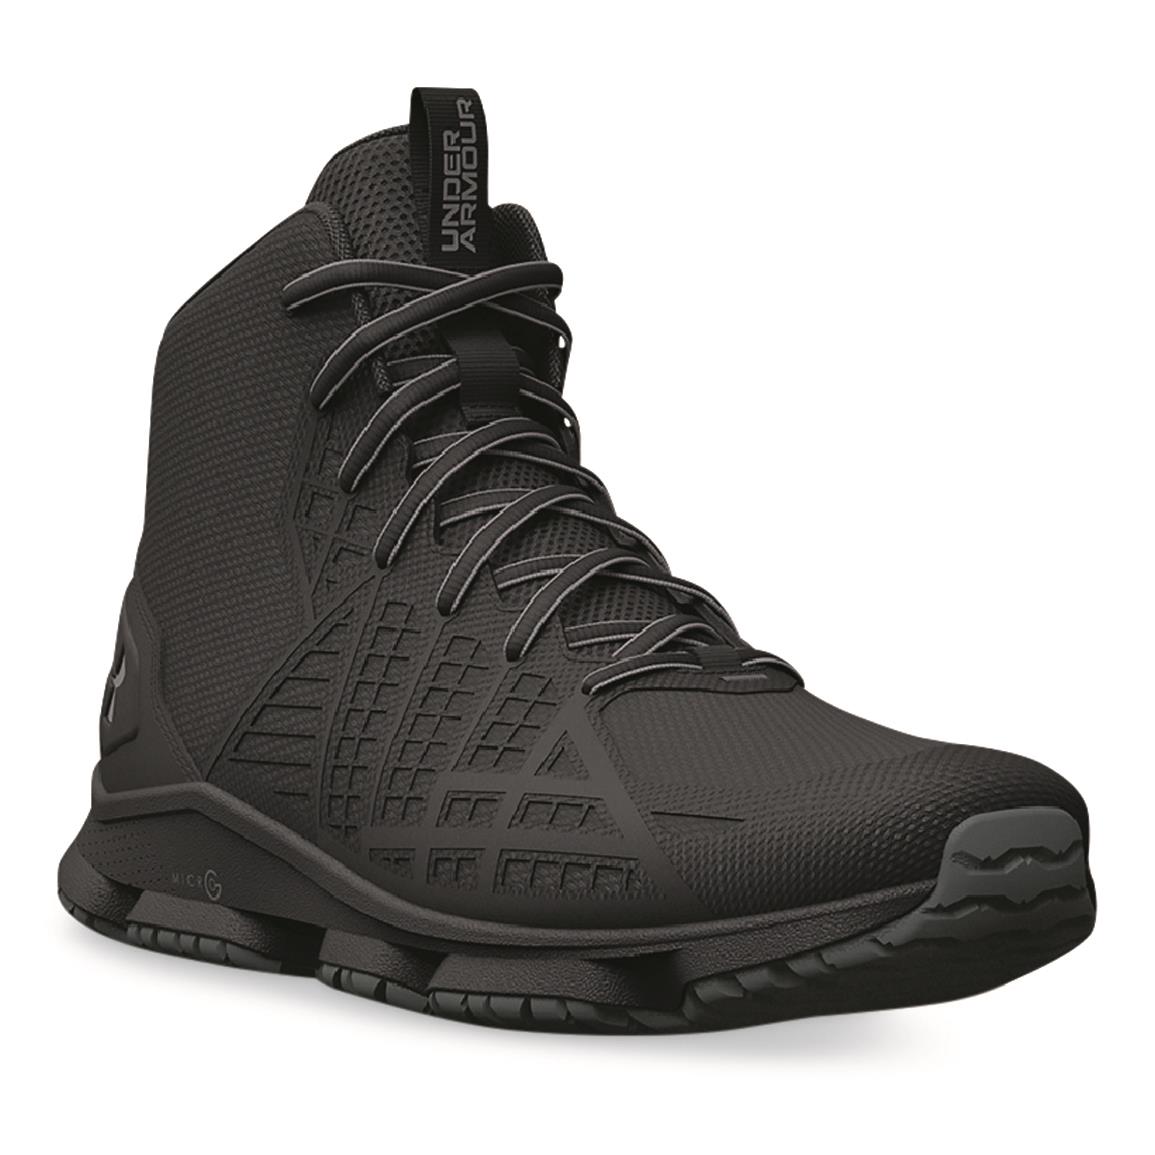 Under Armour Black Lightweight Shoes | Sportsman's Guide